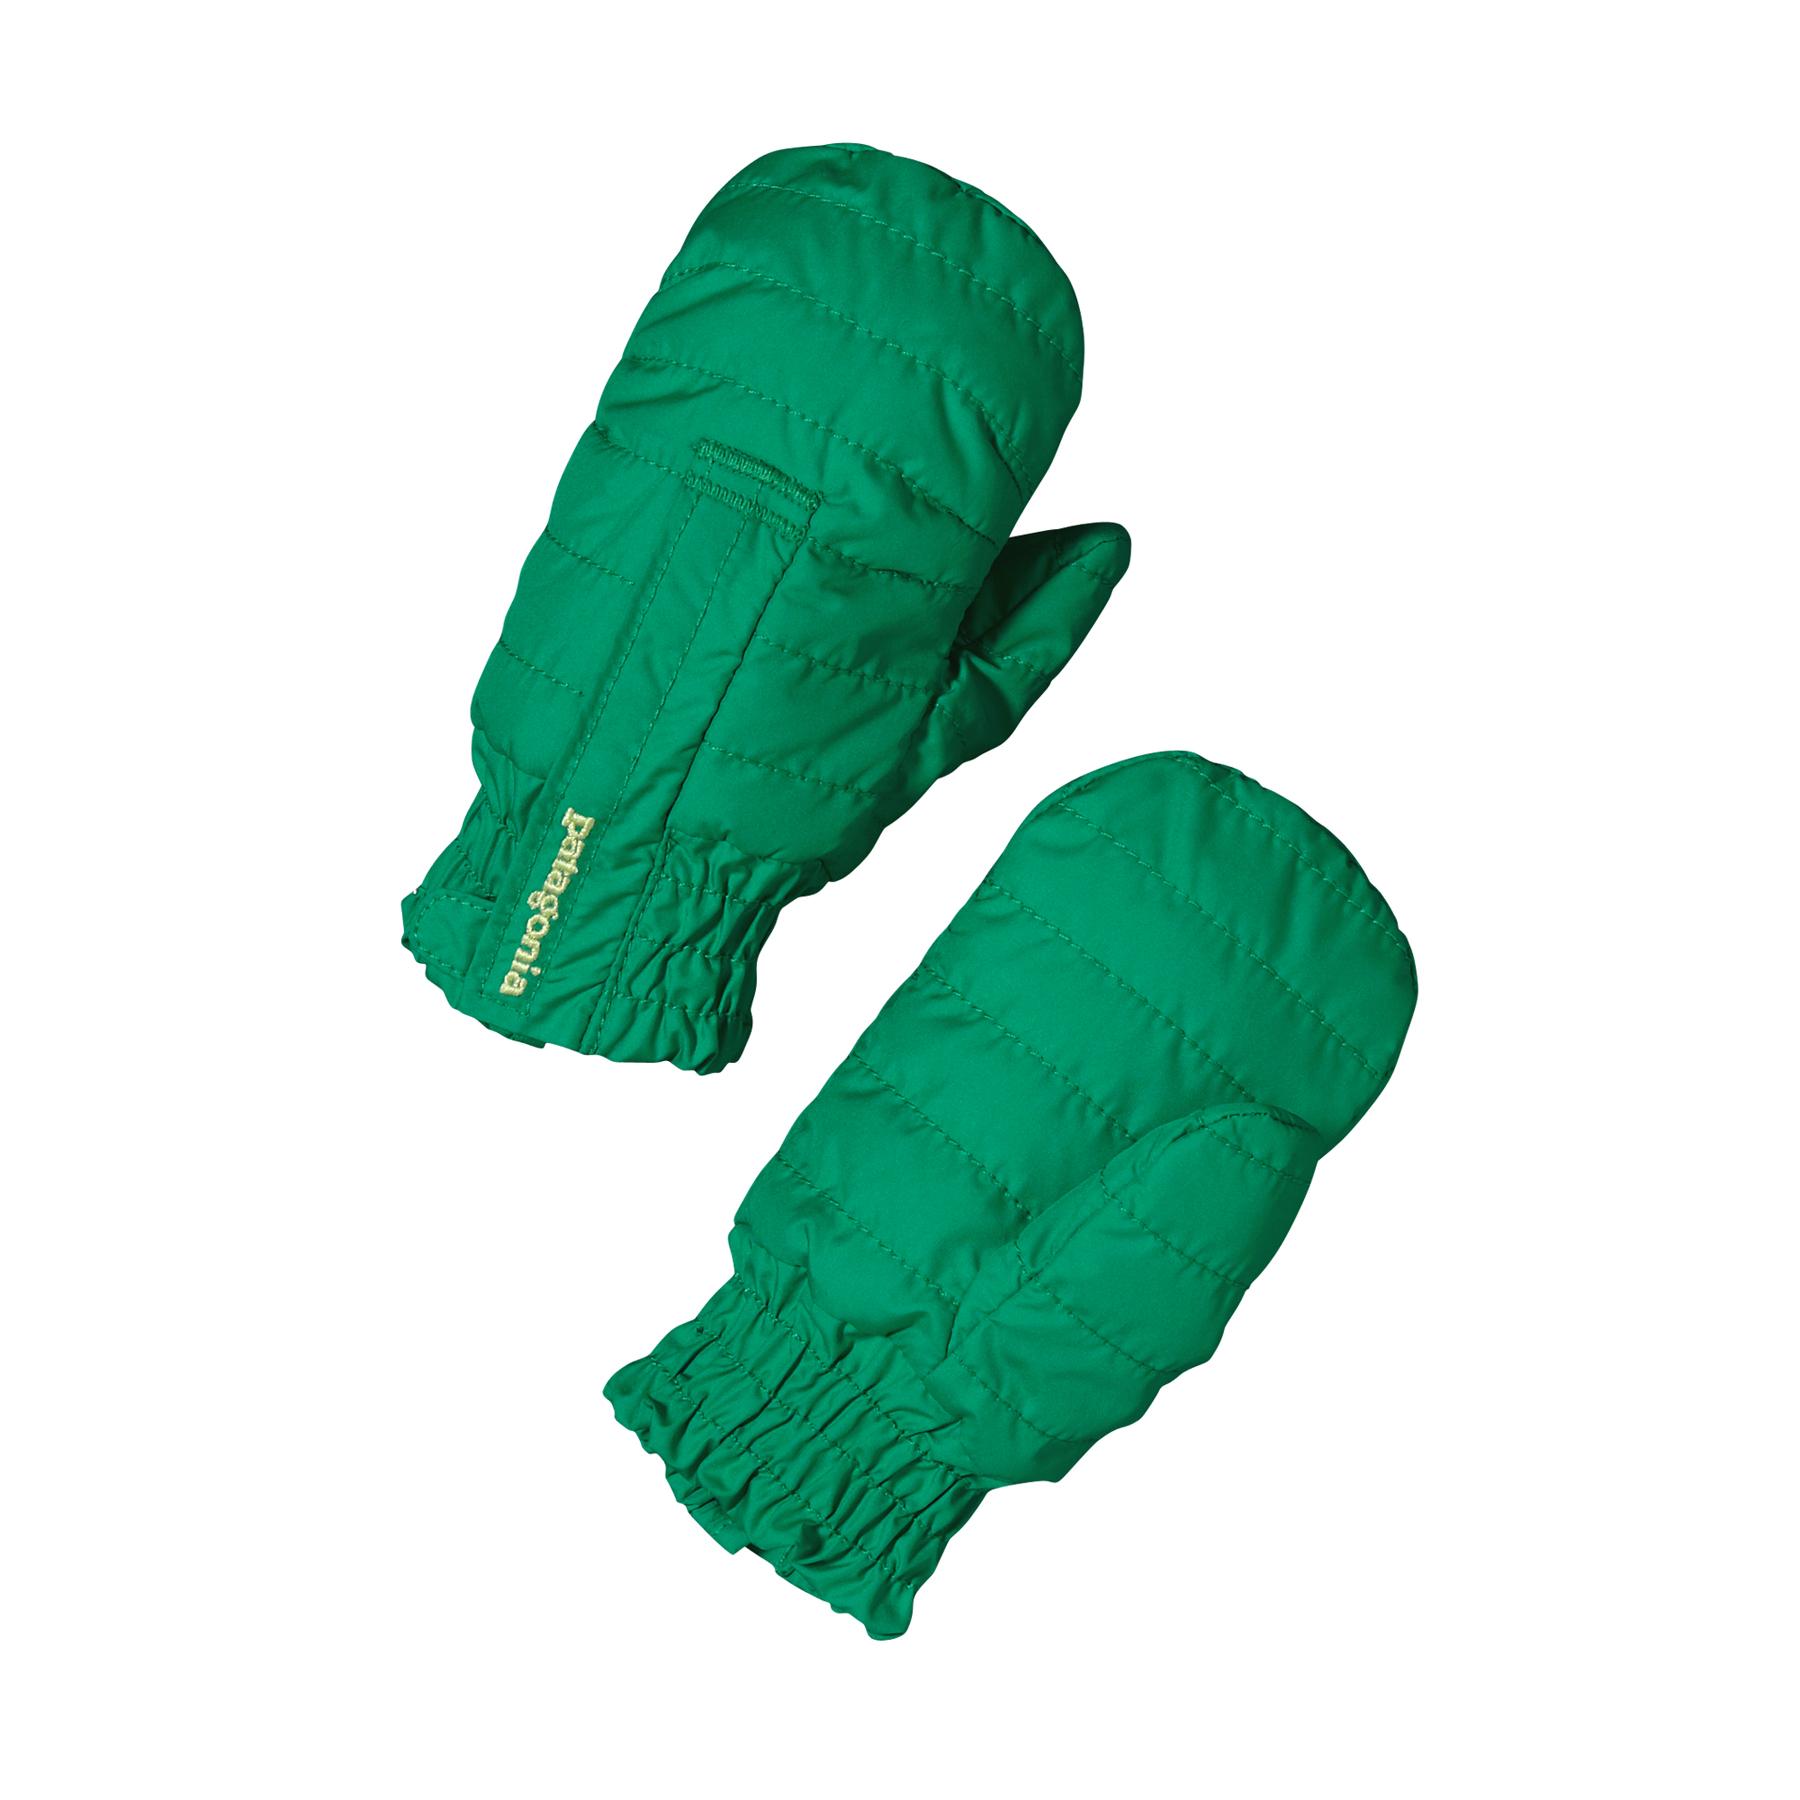 Foto Patagonia Baby Puff Mitts Kids Brilliant Green w/Teal Green (Modell 2013/2014) foto 929210